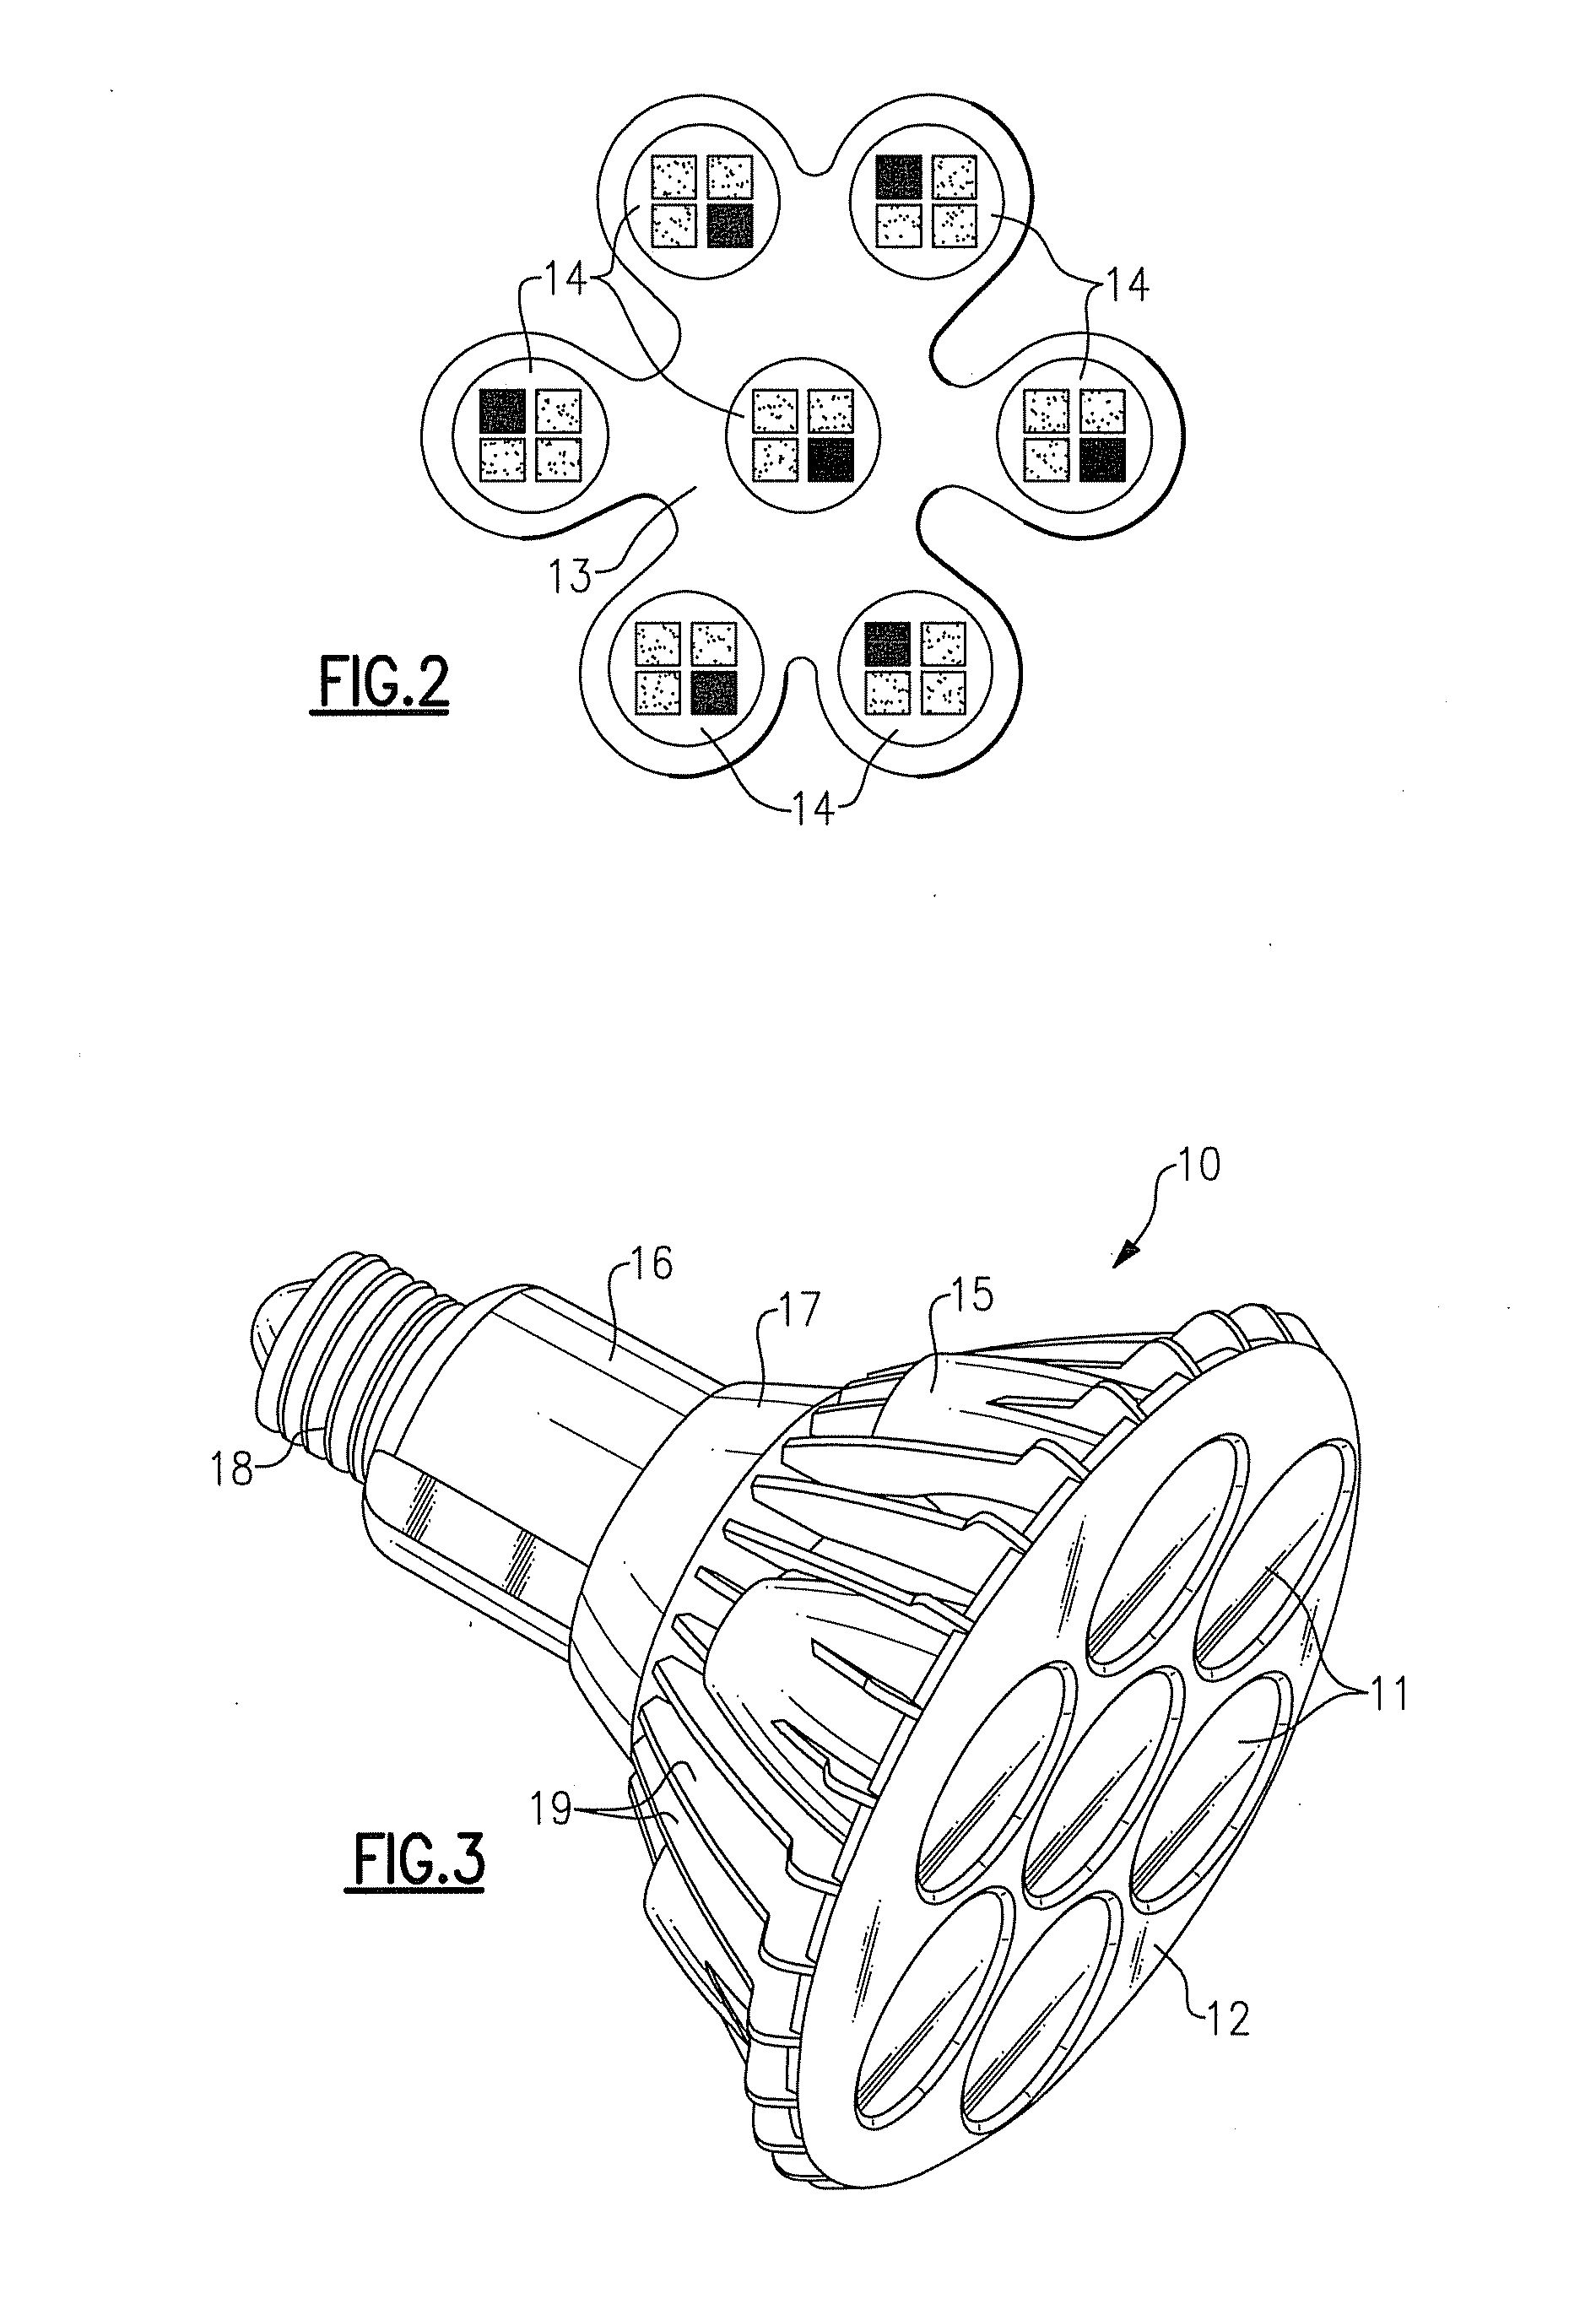 Lighting device with multi-chip light emitters, solid state light emitter support members and lighting elements